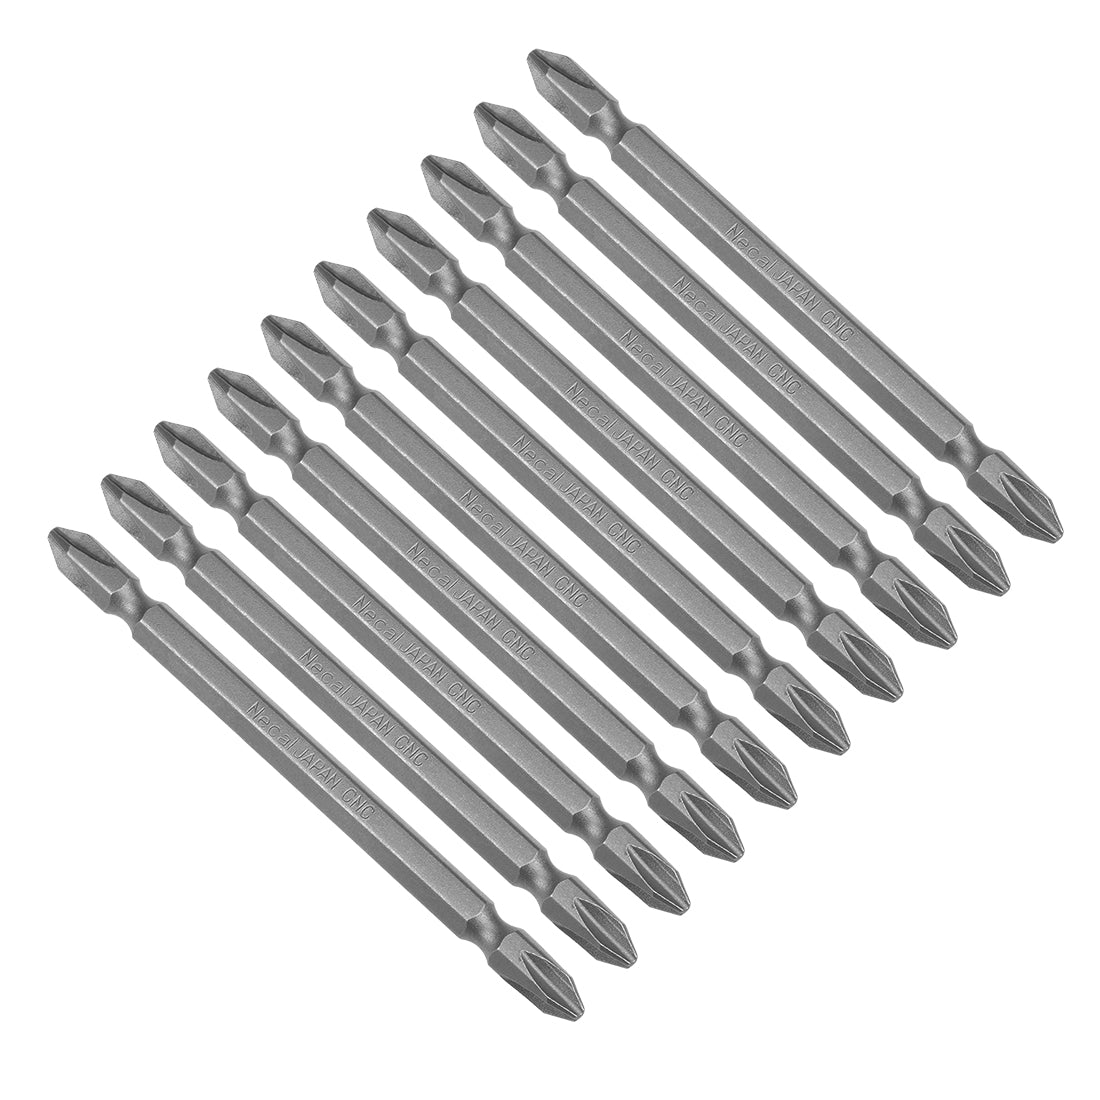 Uxcell Uxcell 10pcs 75mm 1/4" Hex Shank PH2 Magnetic Phillips Double-Ended Screwdriver Bits S2